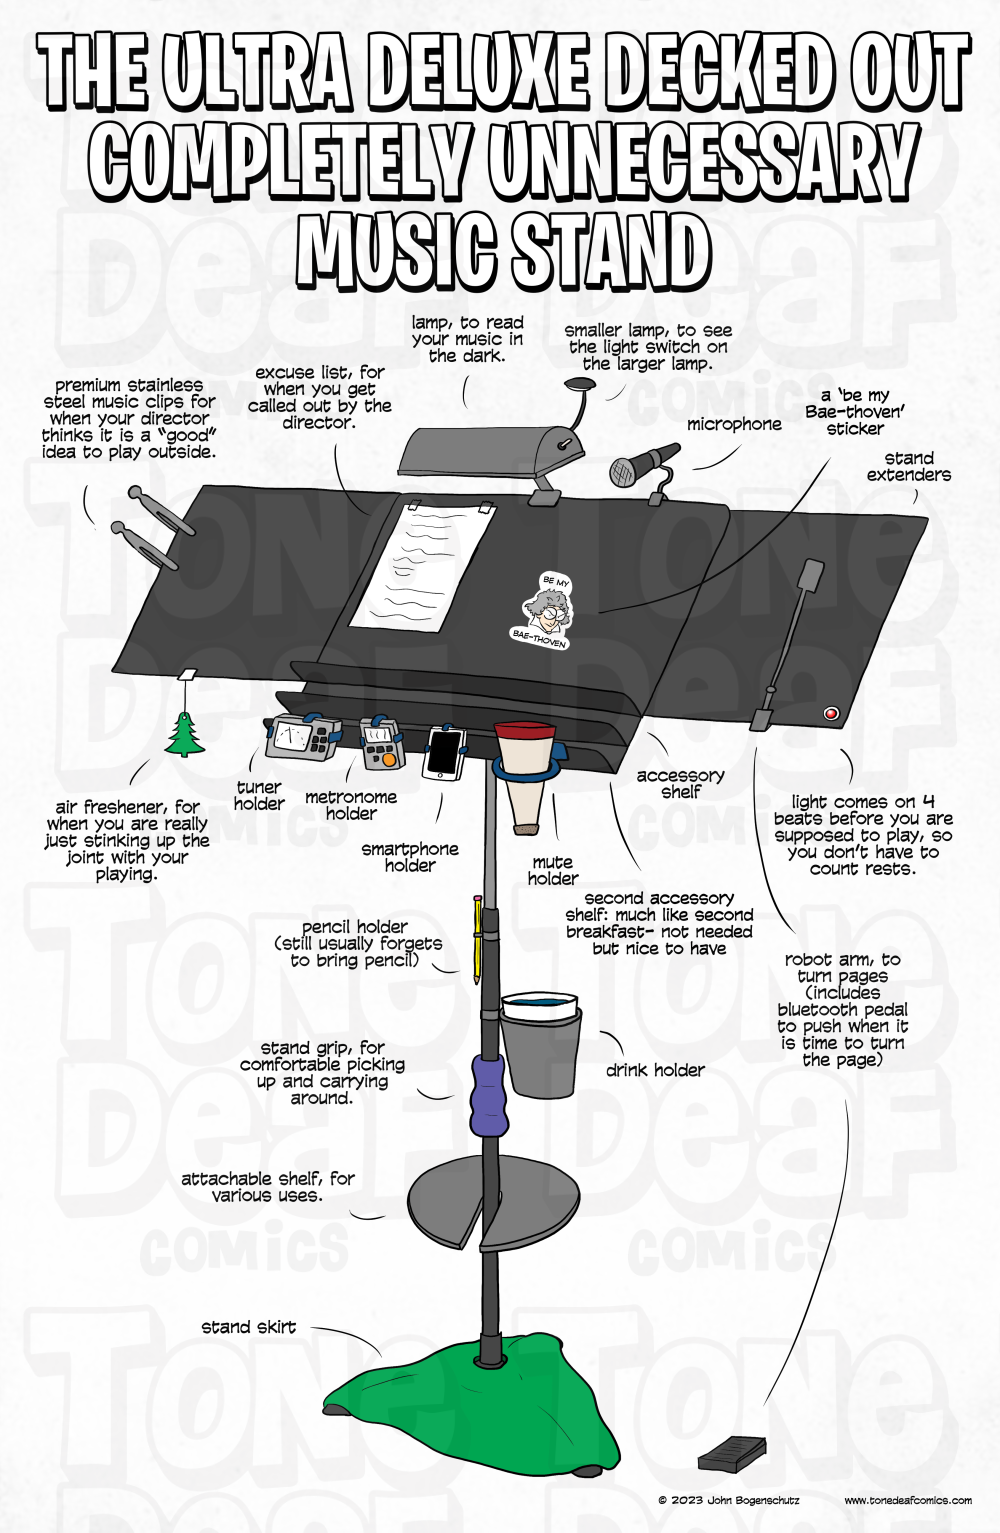 The Ultra Deluxe Music Stand